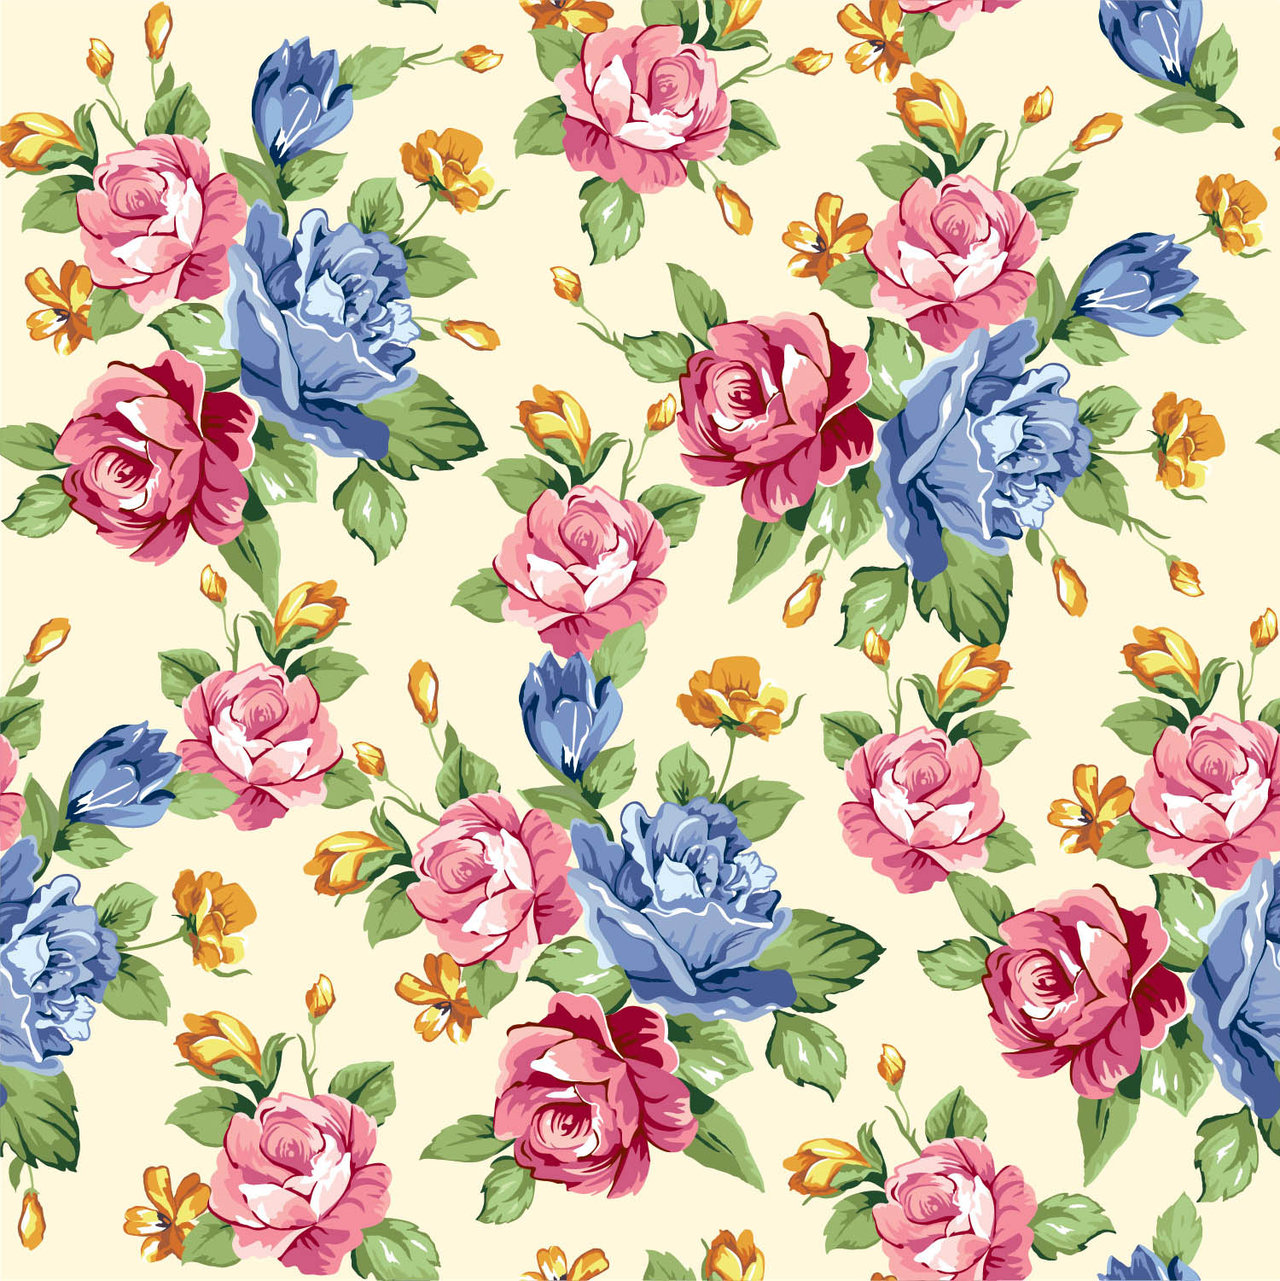 Seamless Floral Print 25 by DonCabanza on